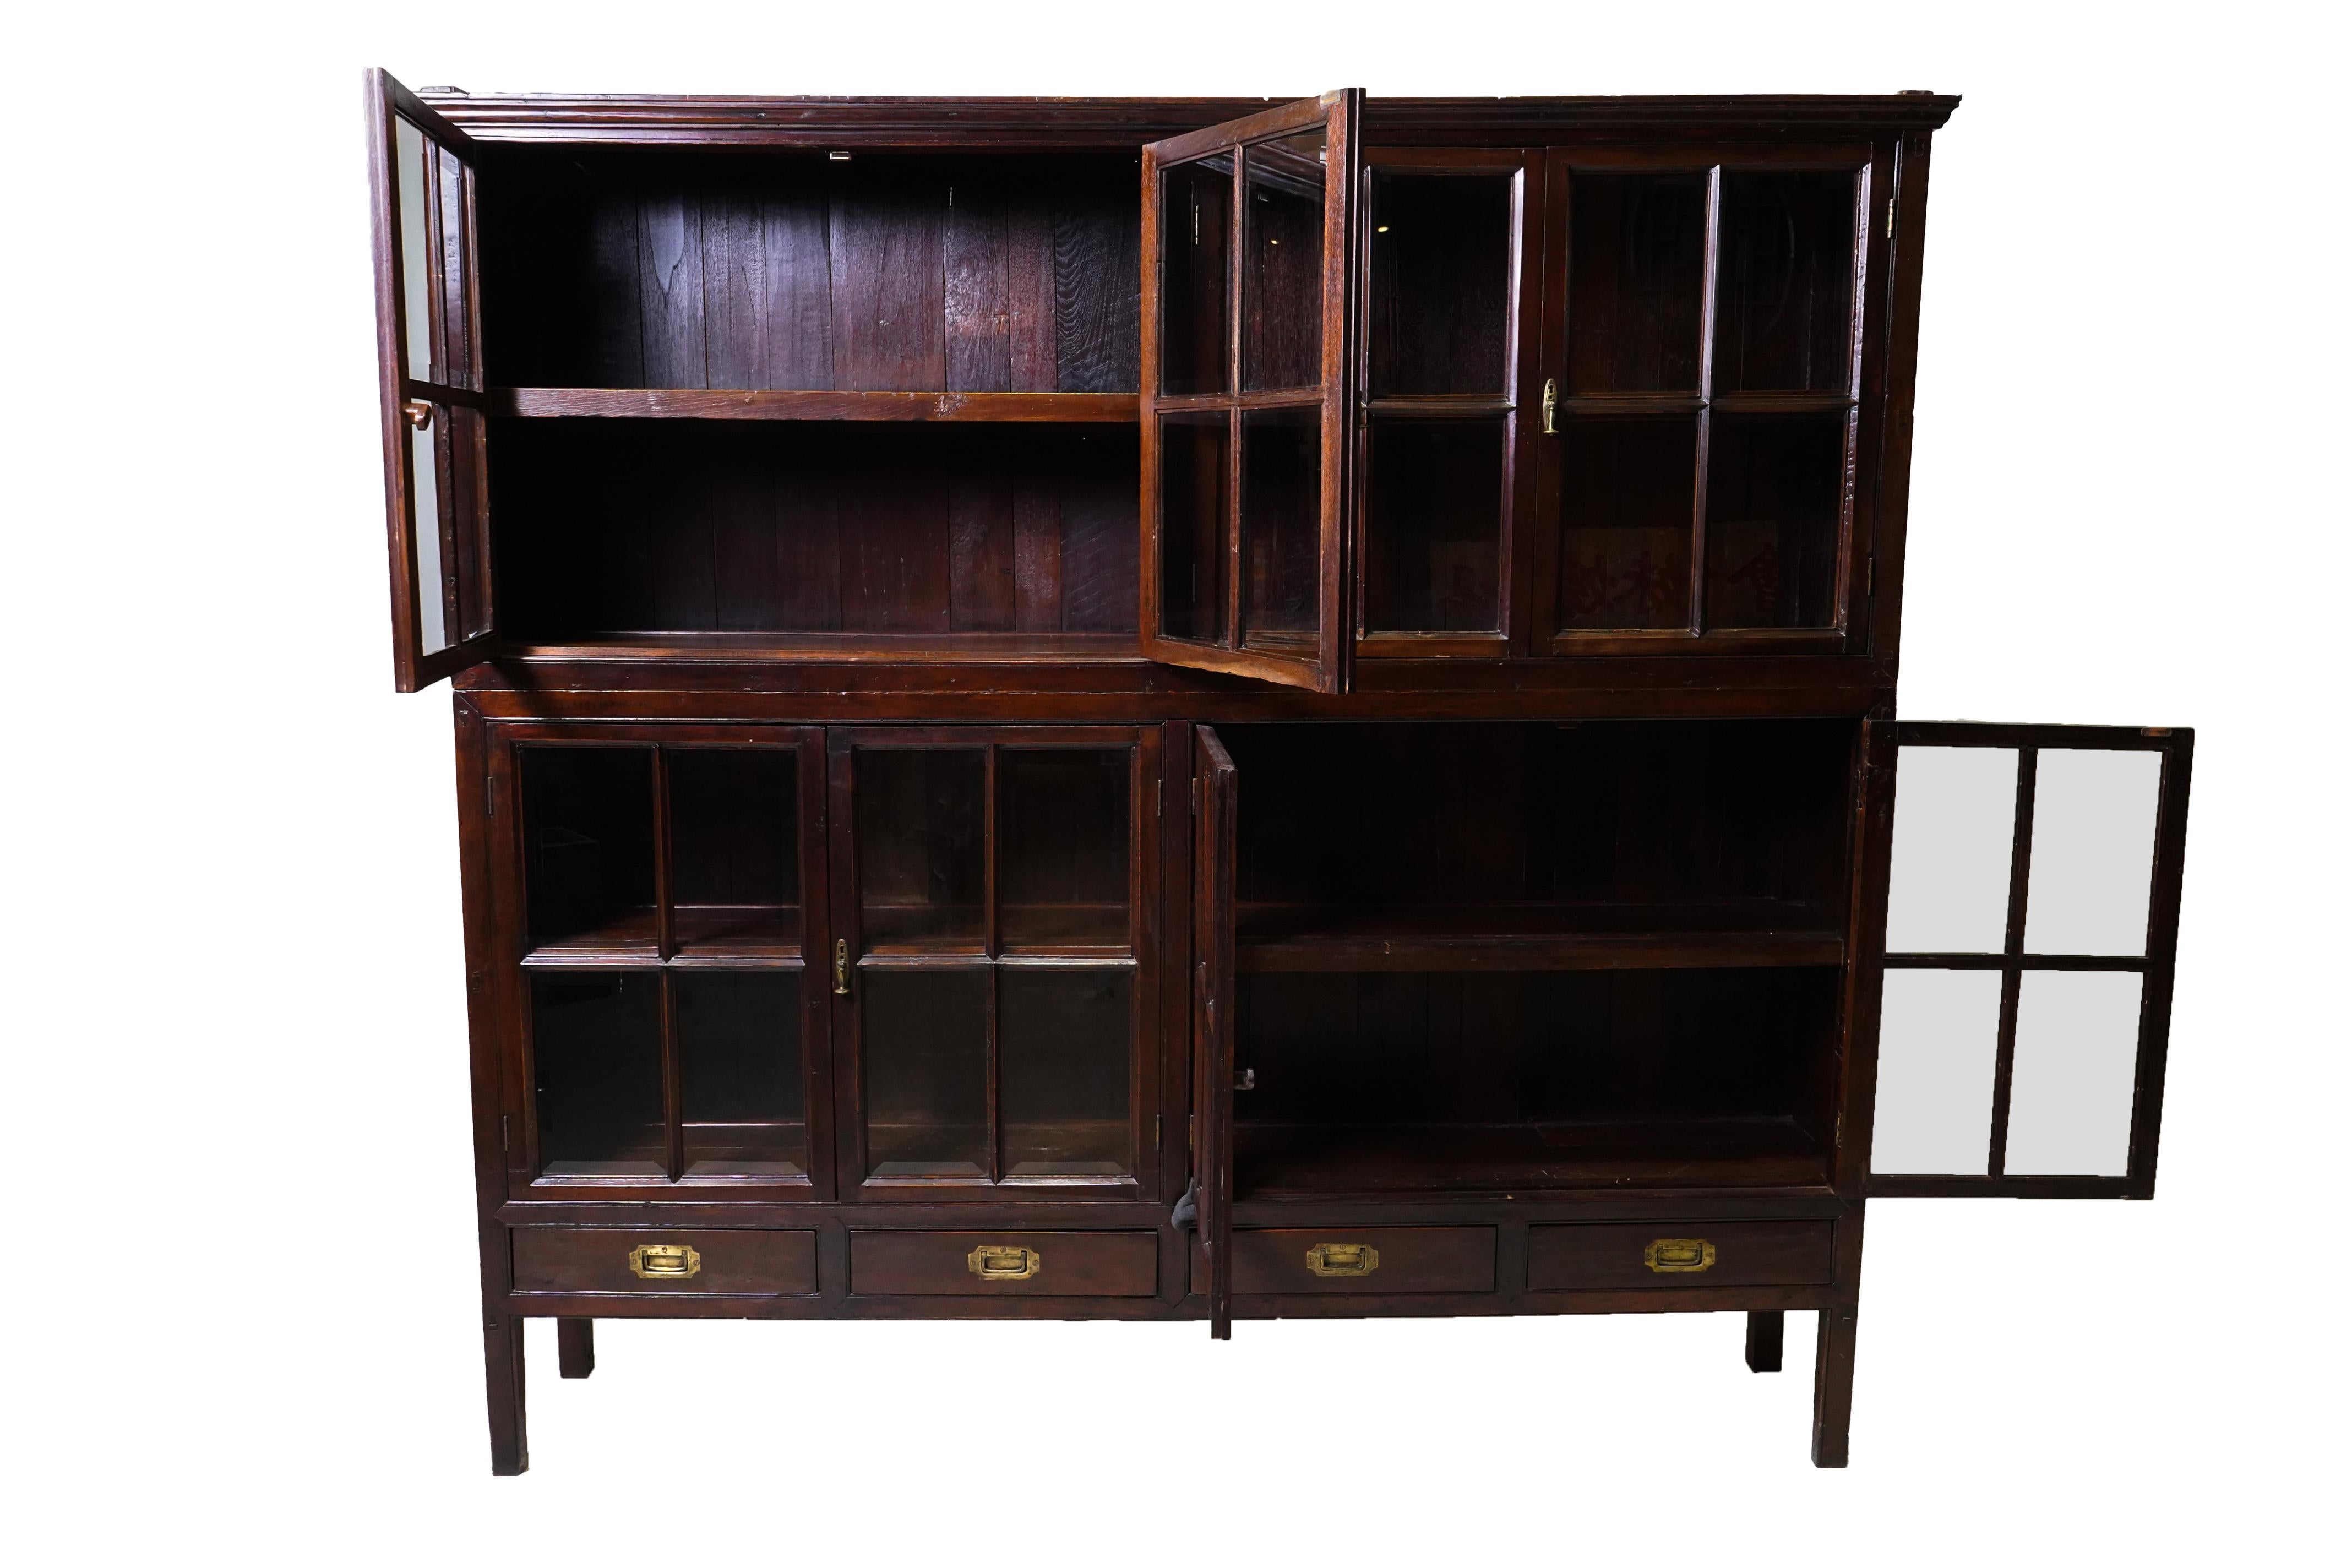 This solid teak bookcase was made around 1900 AD in Rangoon, Burma in the classic British style.  We call these impressive pieces by different names; 